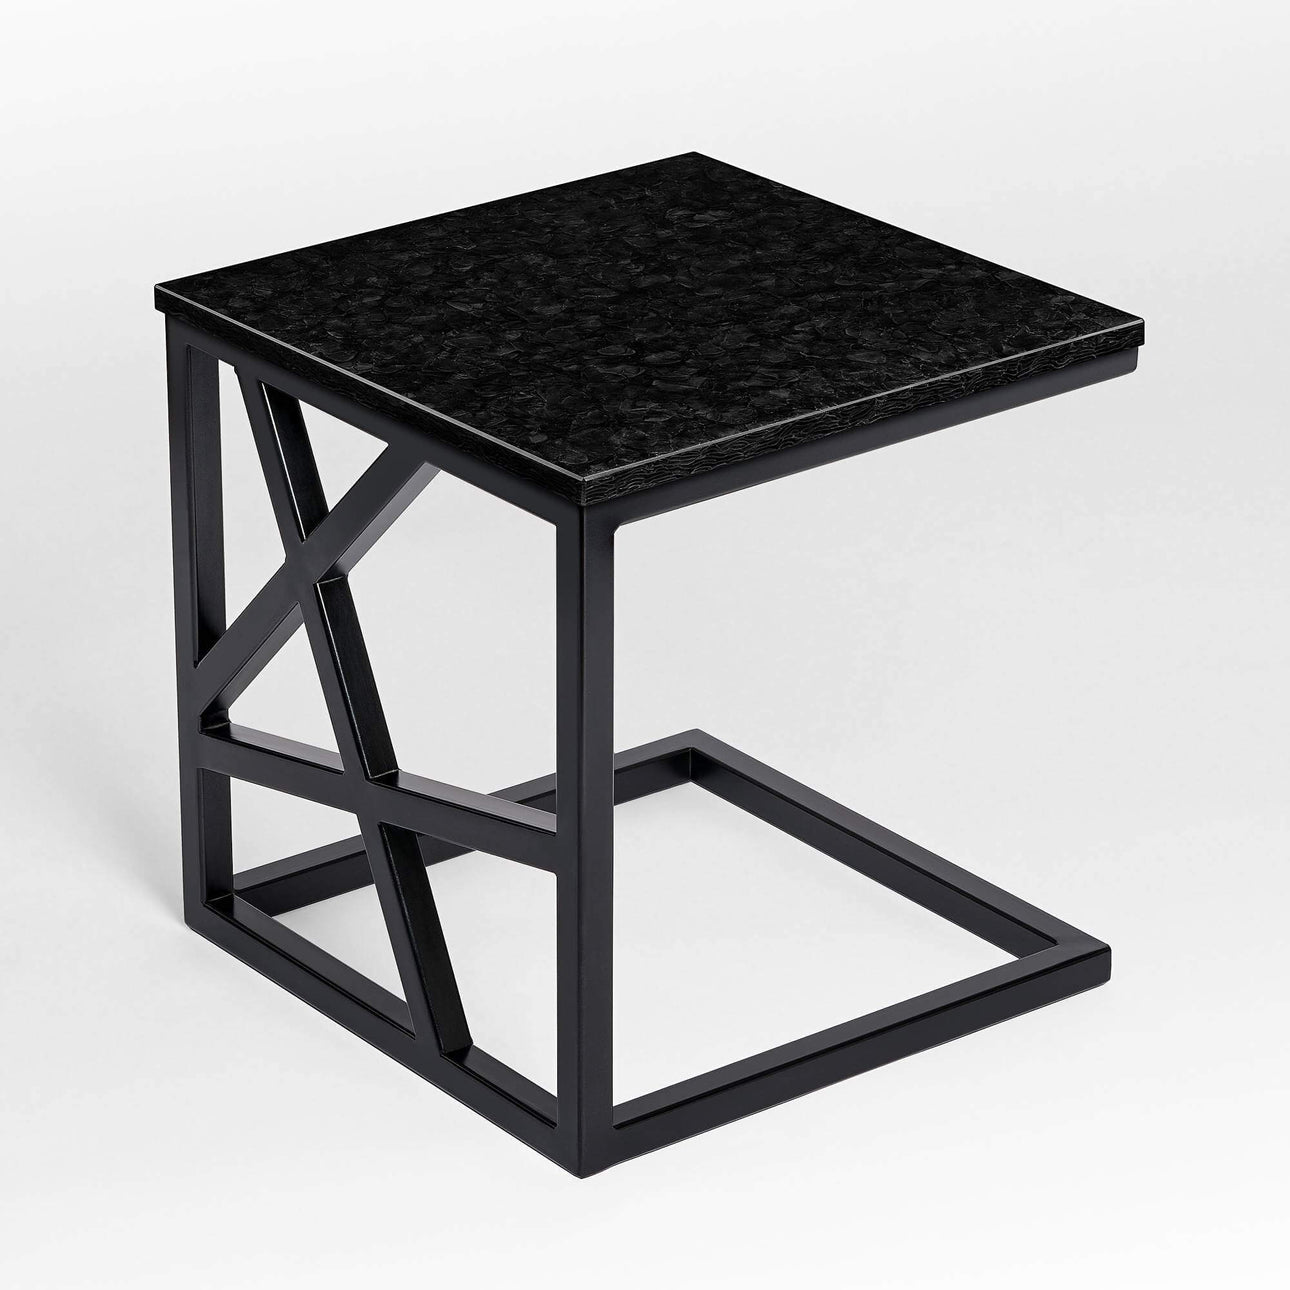 Pittsburgh glass ceramic side table